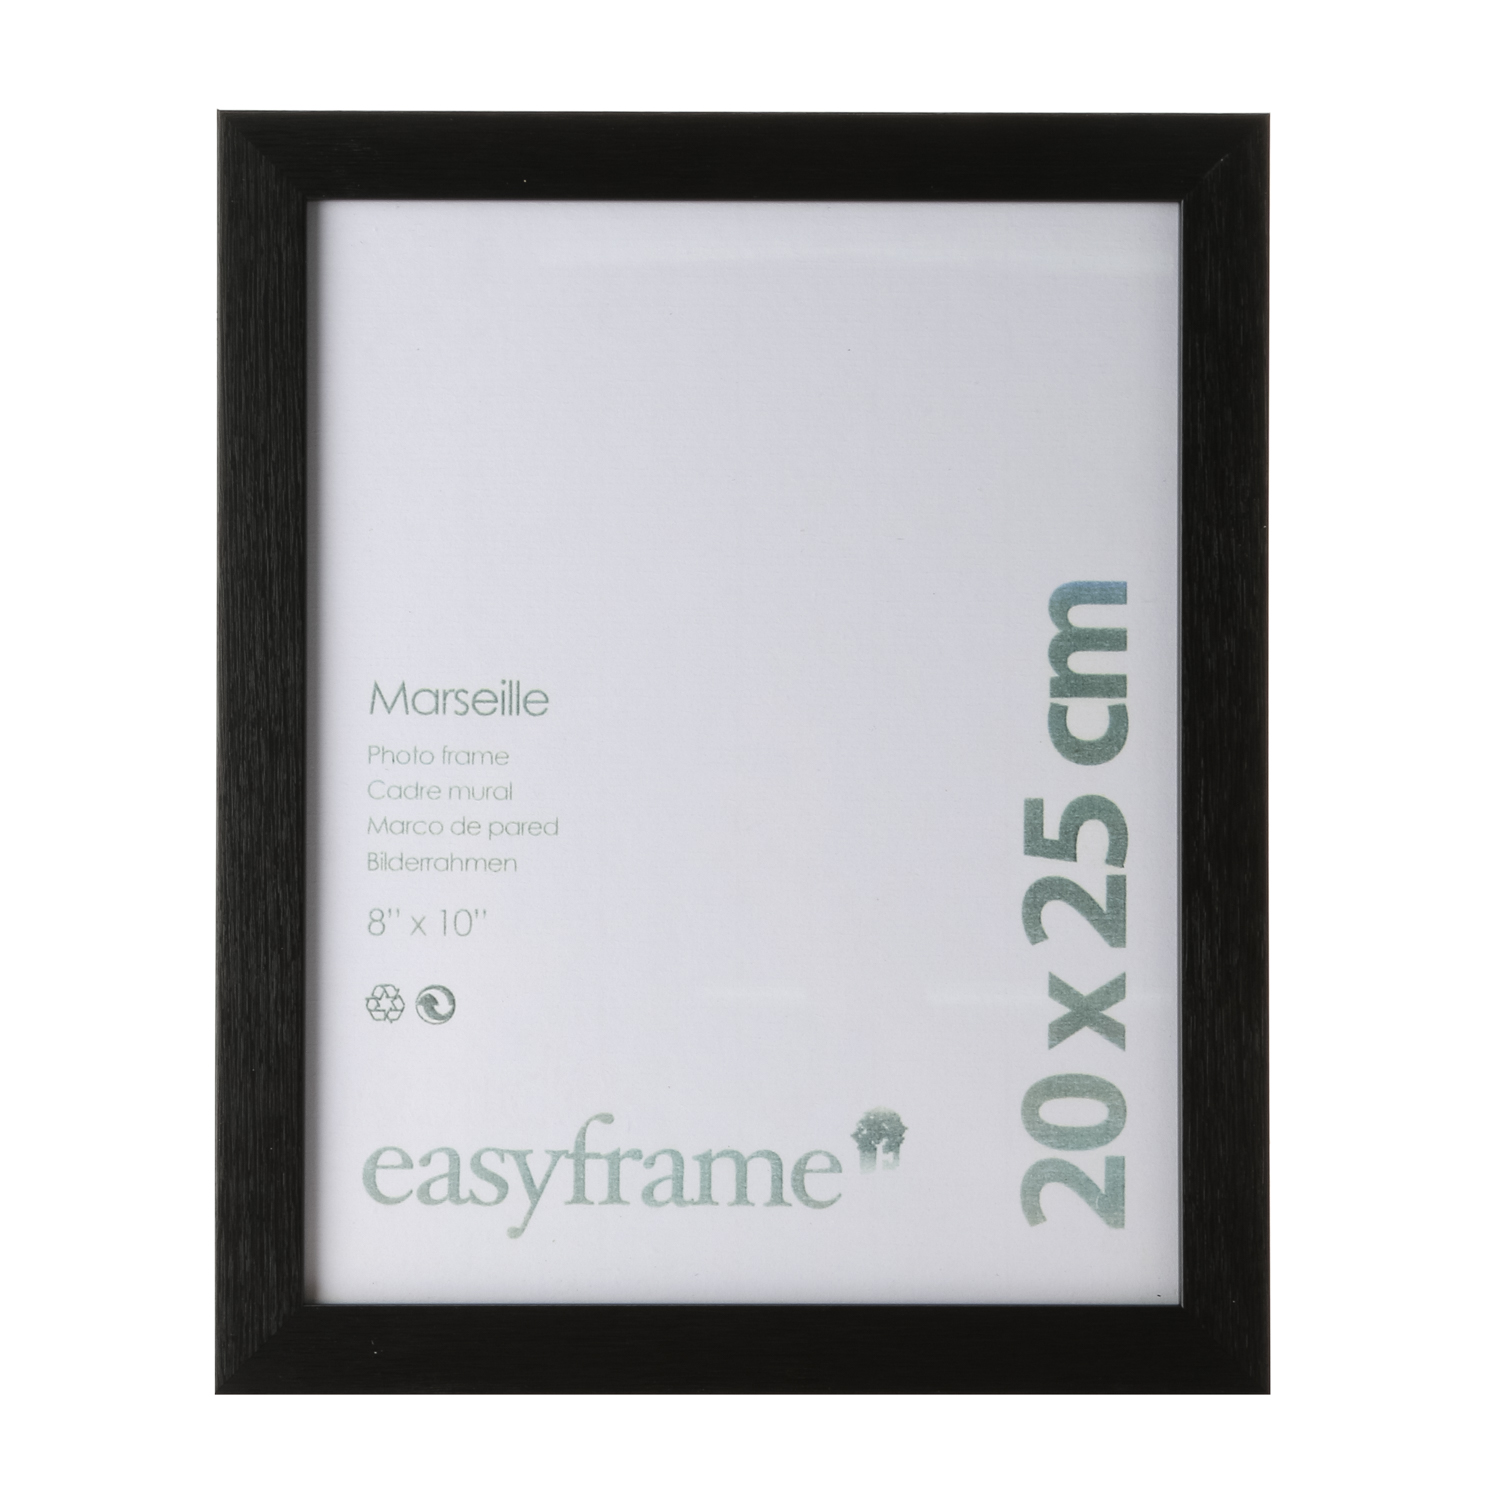 home picture frame